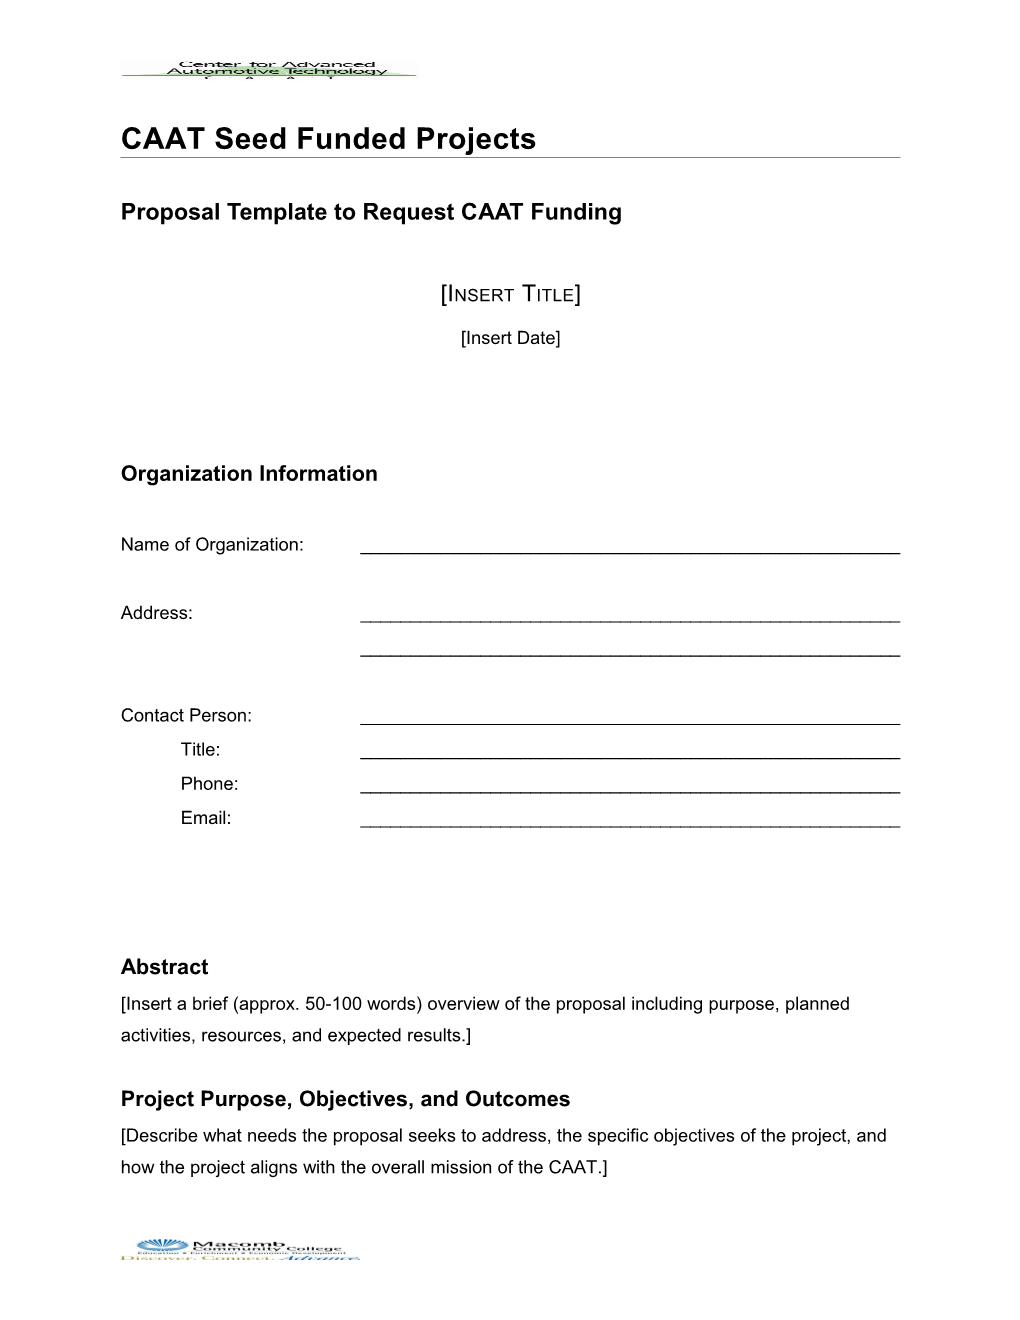 Template to Request CAAT Funding